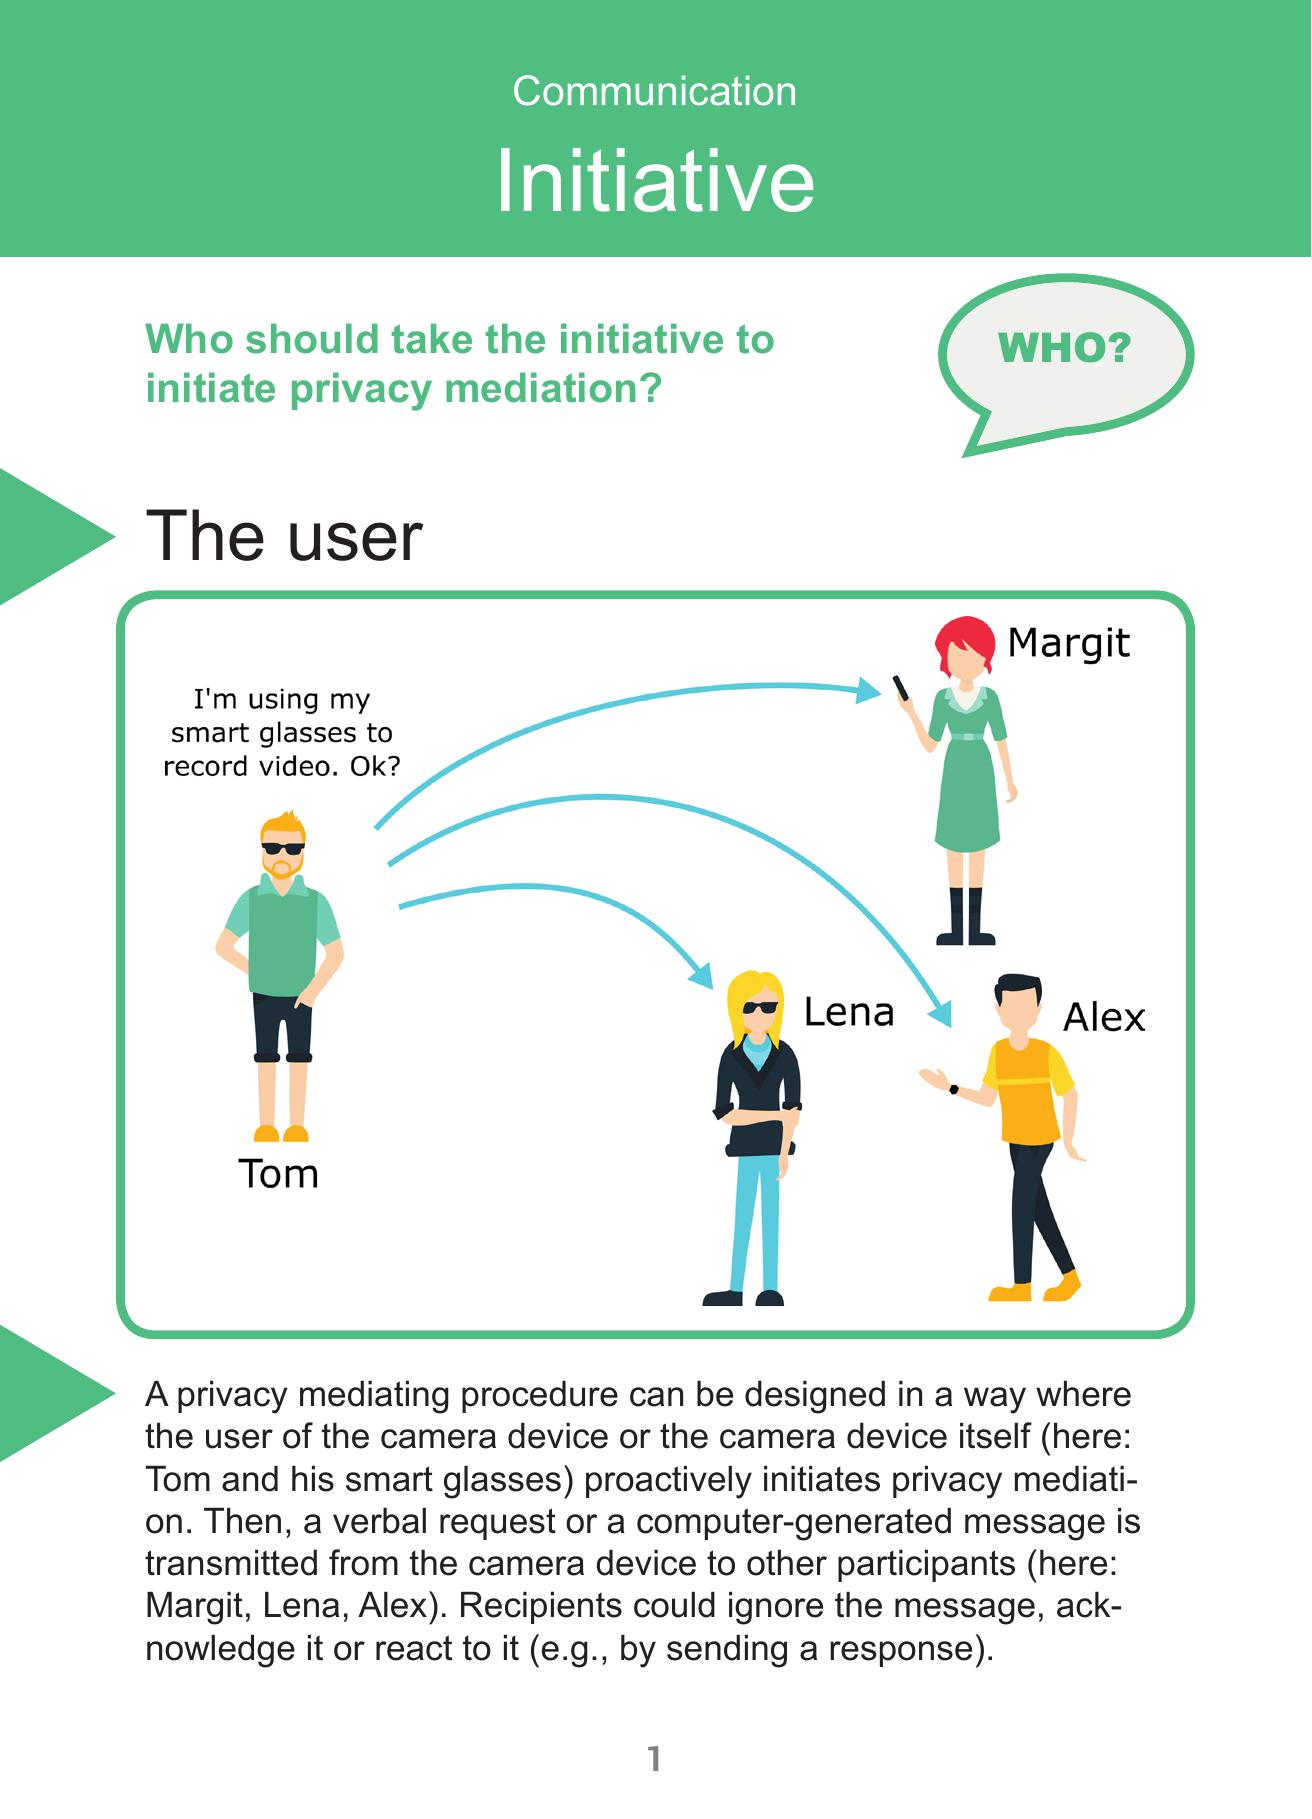 The image shows the front of a card. At the top there is a header with a green background, the rest of the card has a white background The header has the word Communication in small letters and the word Initiative in bigger letters in it. Below the header are the words Who should take the initiative to initiate privacy mediation?, to the right of it is a speech bubble with the word WHO? in it. Below that is a heading that says The user, to the left of it is a green triangle. Below that is an image with a green border with rounded corners. There are three people visible, Tom, Margit, Lena and Alex, with their names next to them. There are three blue arrows pointing from Tom to the others and there is text above Toms head that says I’m using my smart glasses to record video. Ok? Below that is a paragraph with a green triangle to the left of it. The paragraph reads A privacy mediating procedure can be designed in a way where the user of the camera device or the camera device itself (here Tom and his smart glasses) proactively initiates privacy mediation. Then, a verbal request or a computer-generated message is transmitted from the camera device to other participants (here Margit, Lena, Alex). Recipients could ignore the message, acknowledge it or react to it (e.g., by sending a response).